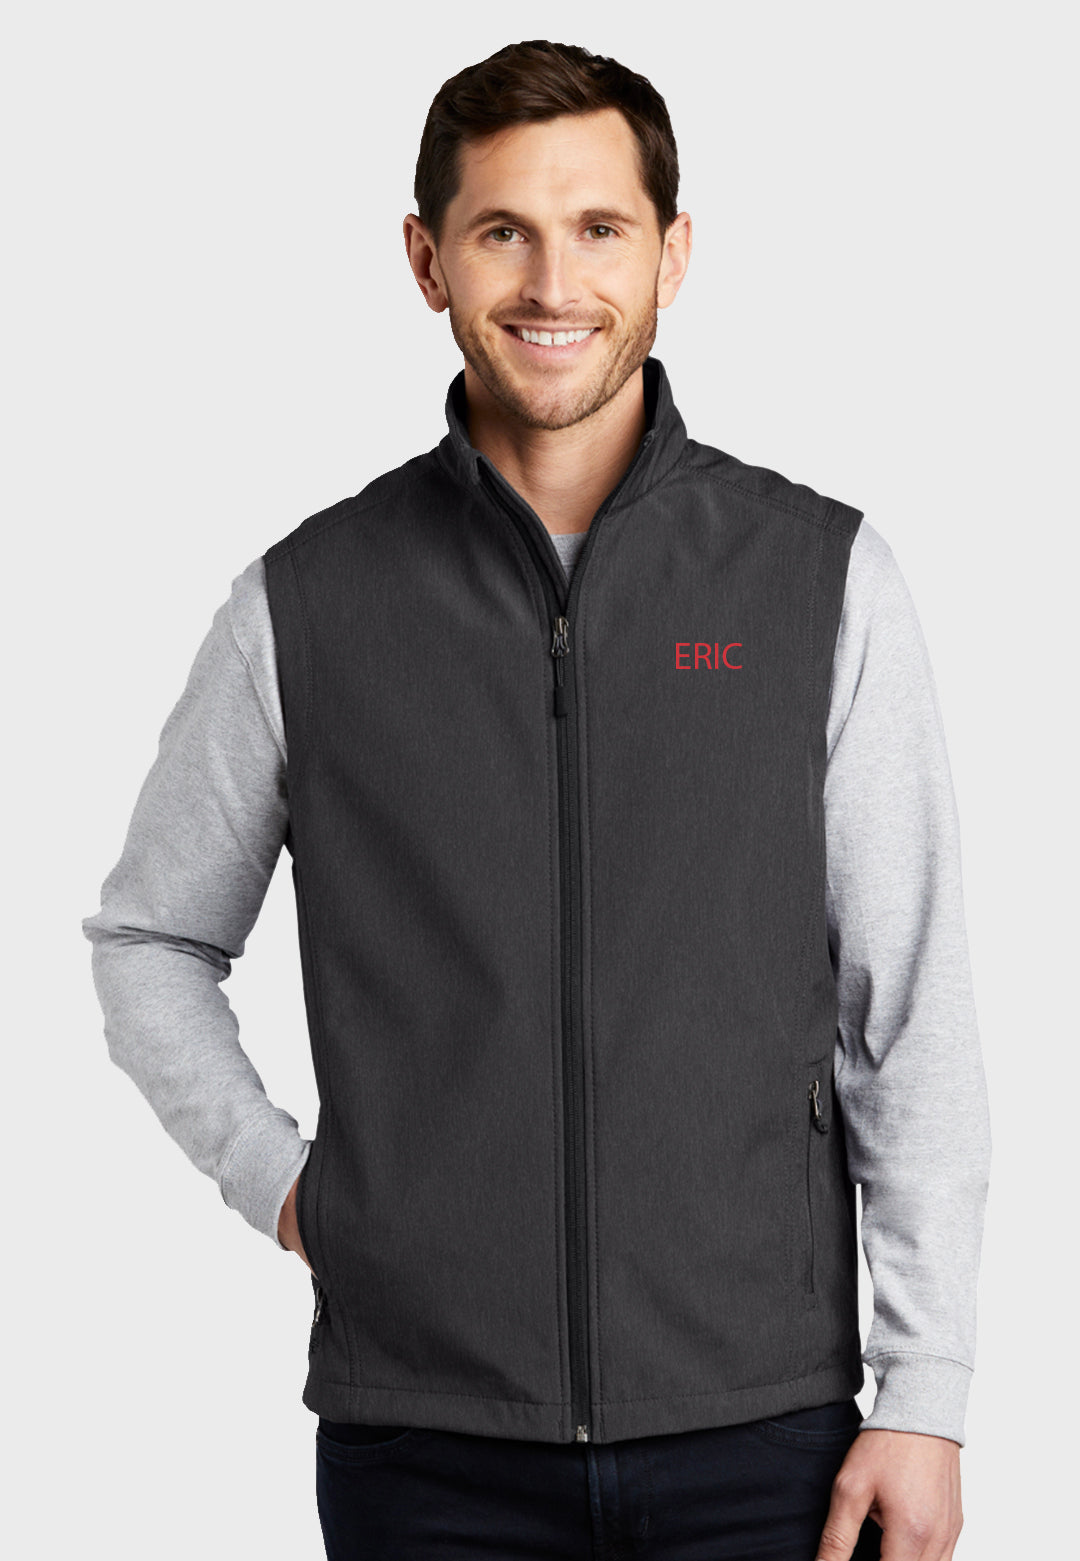 Red Line Equestrian Port Authority® Mens Black Core Soft Shell Vest - Grey